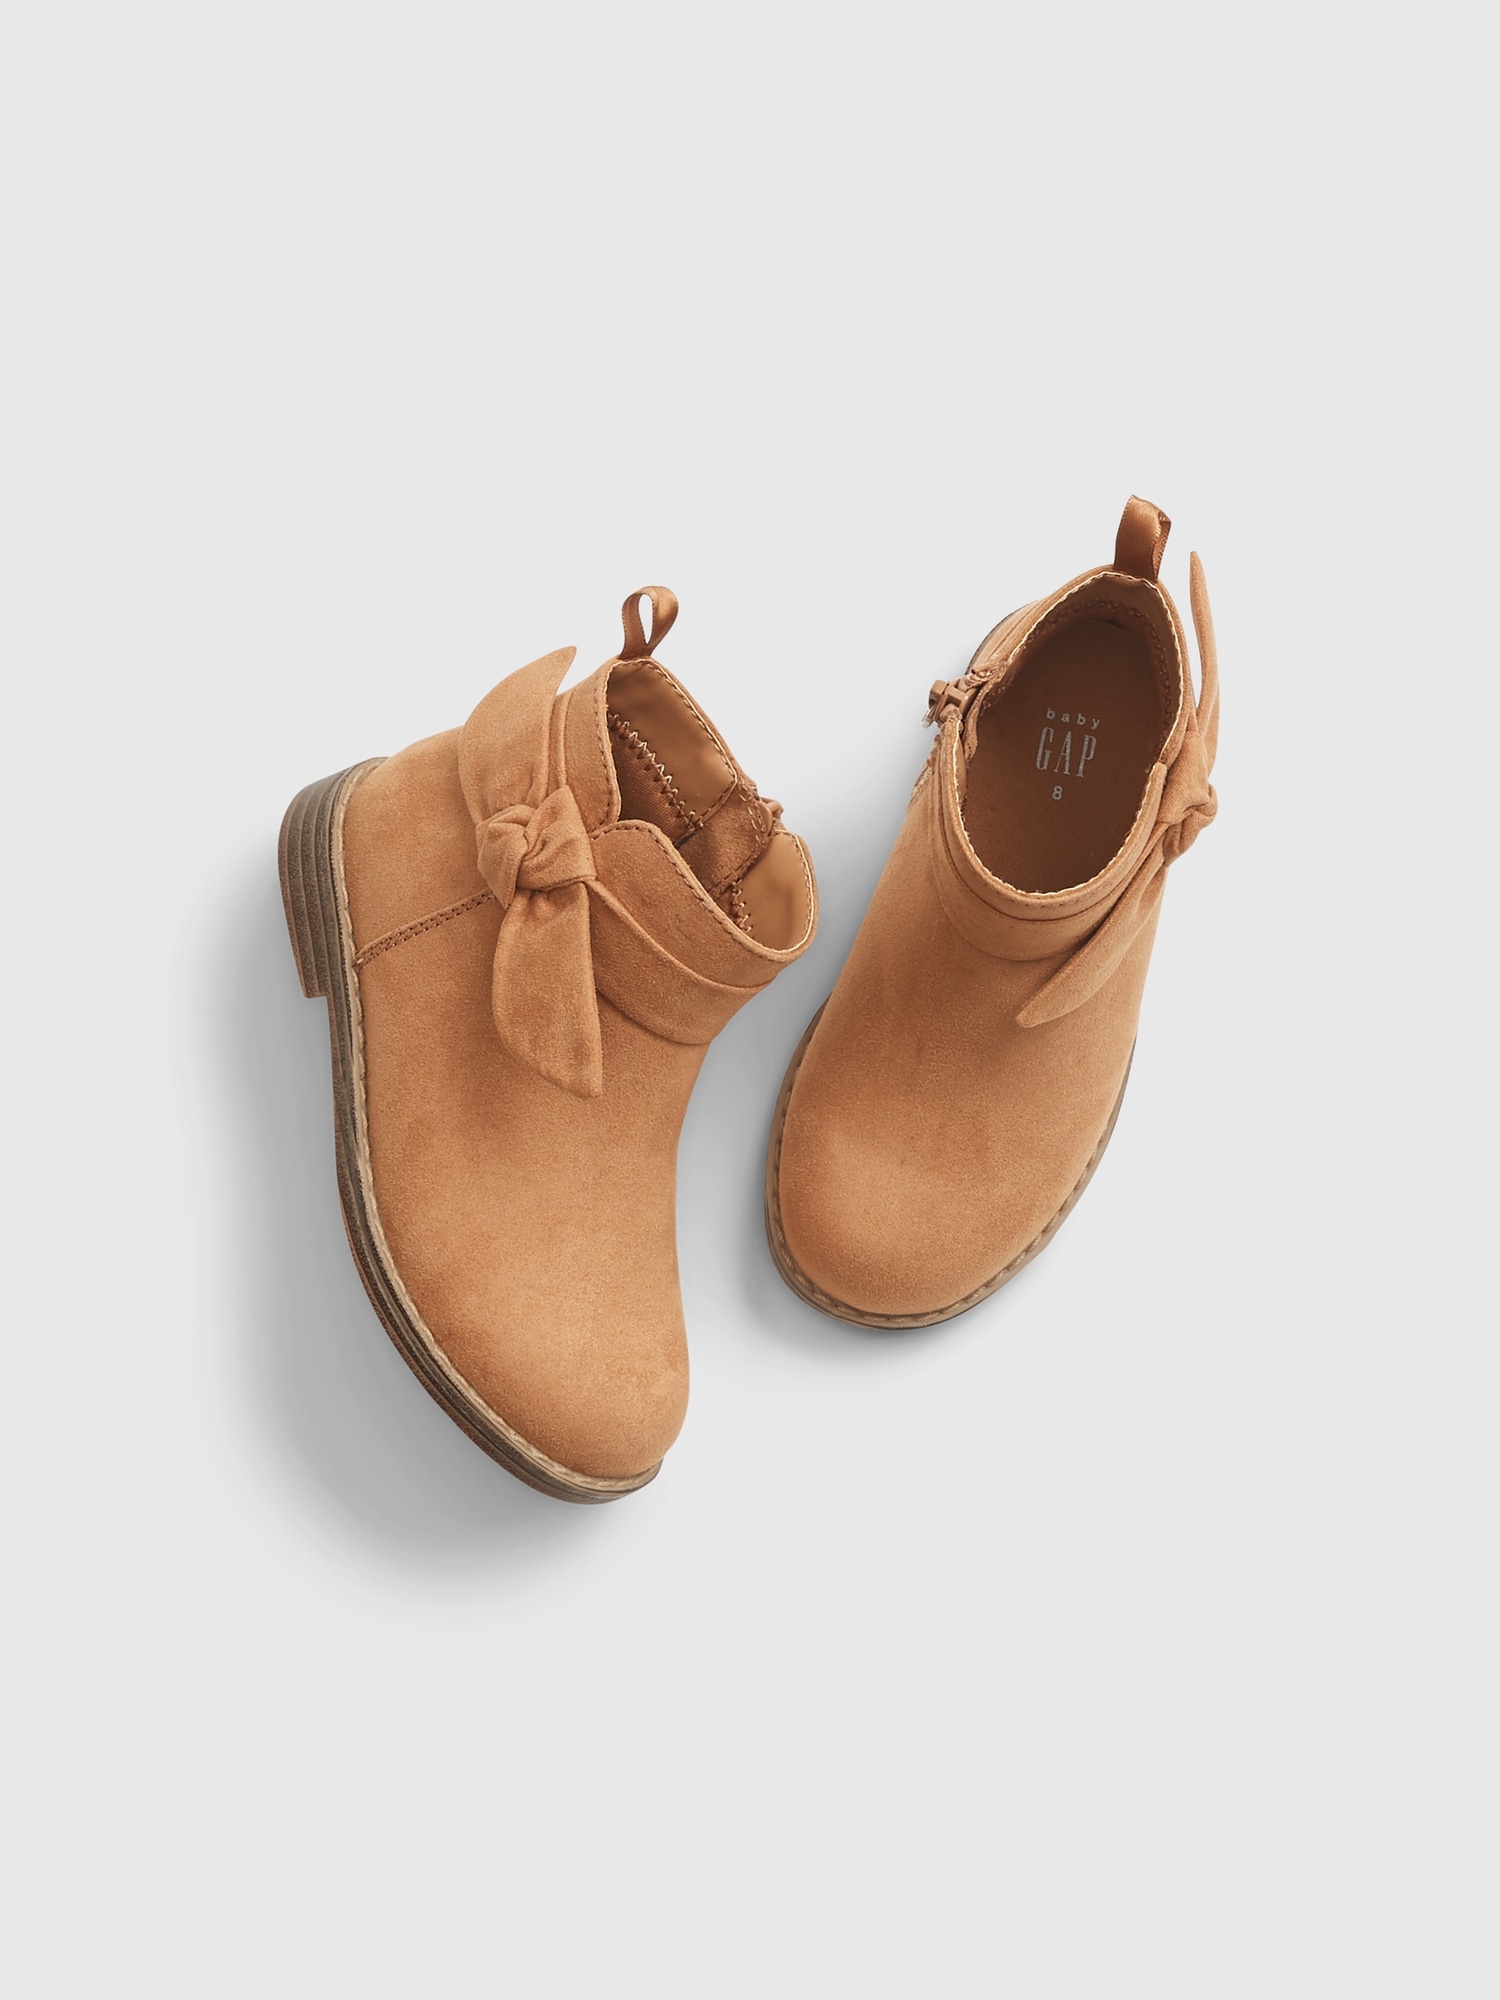 Toddler Bow Ankle Boots | Gap